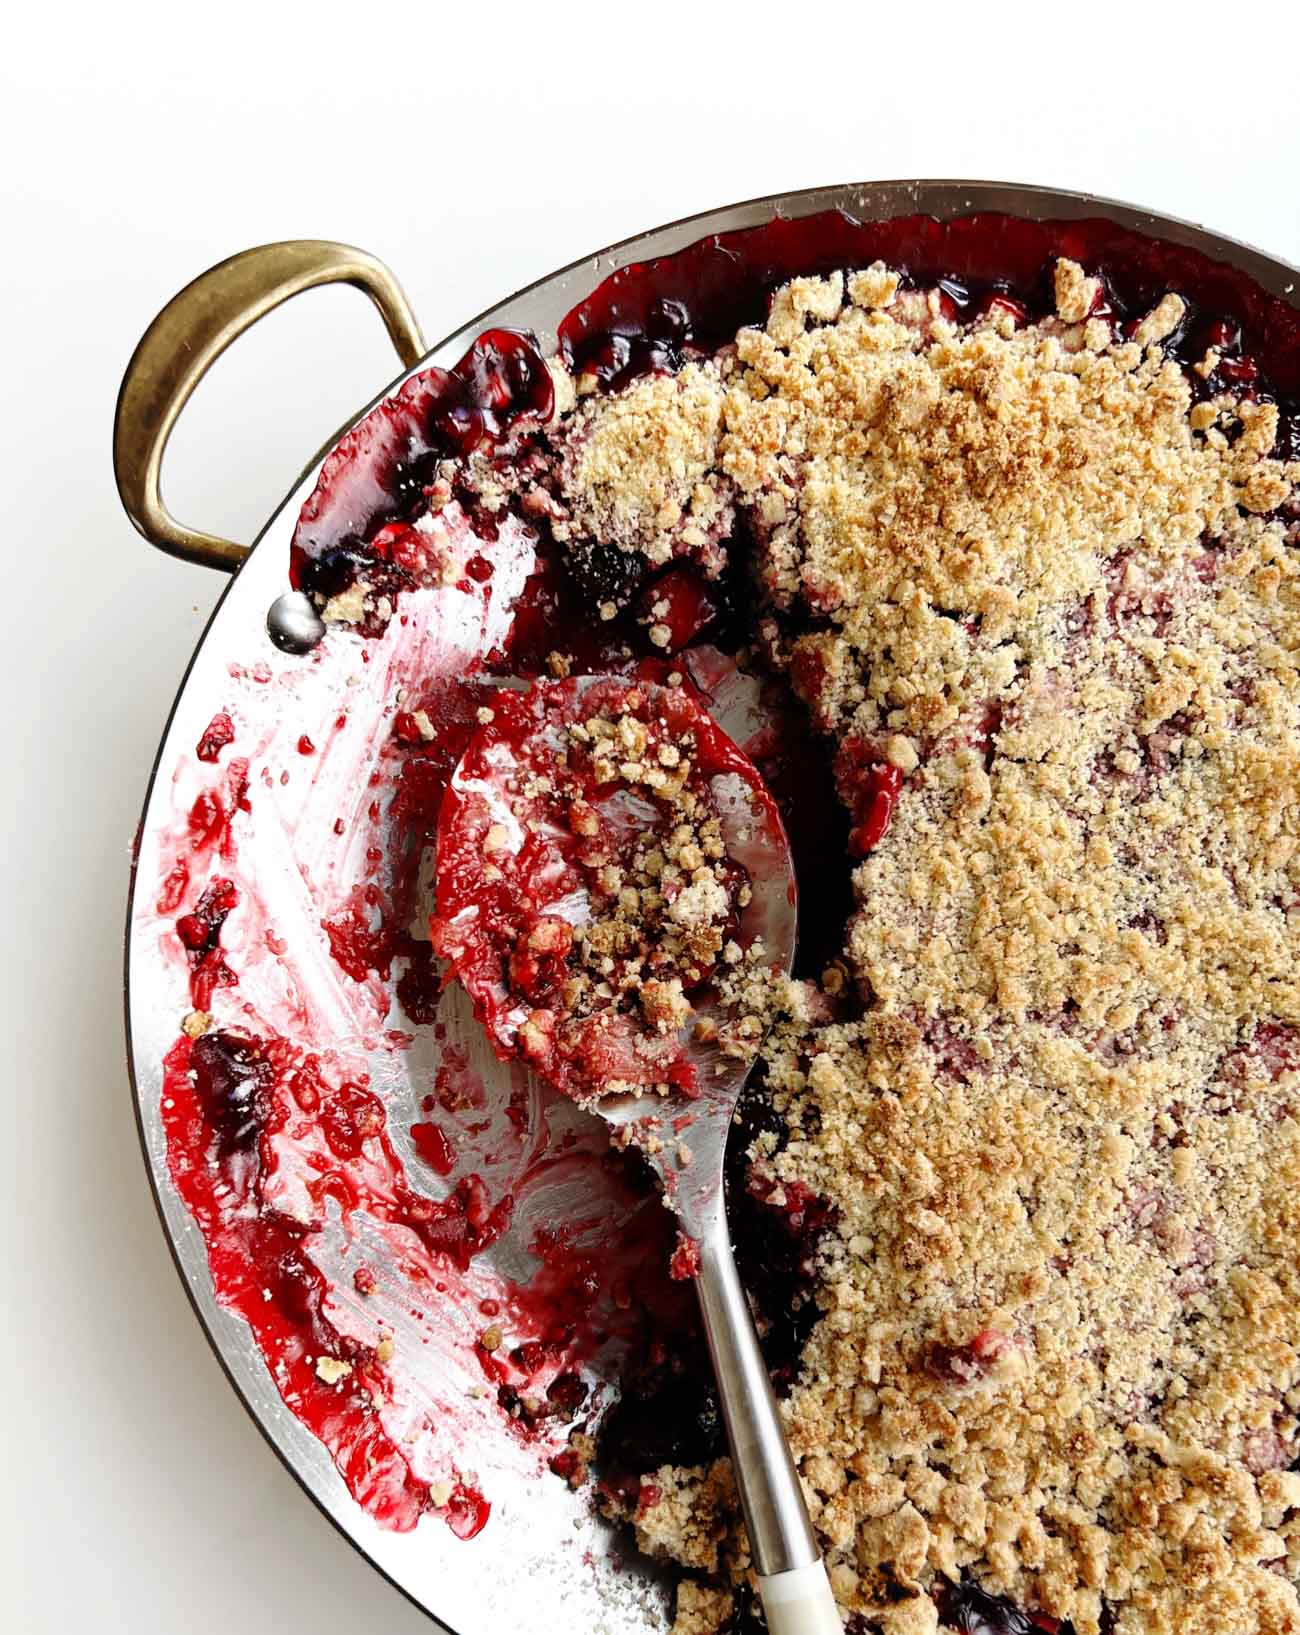 Cherry Rhubarb Crisp in a skillet pan with spoon